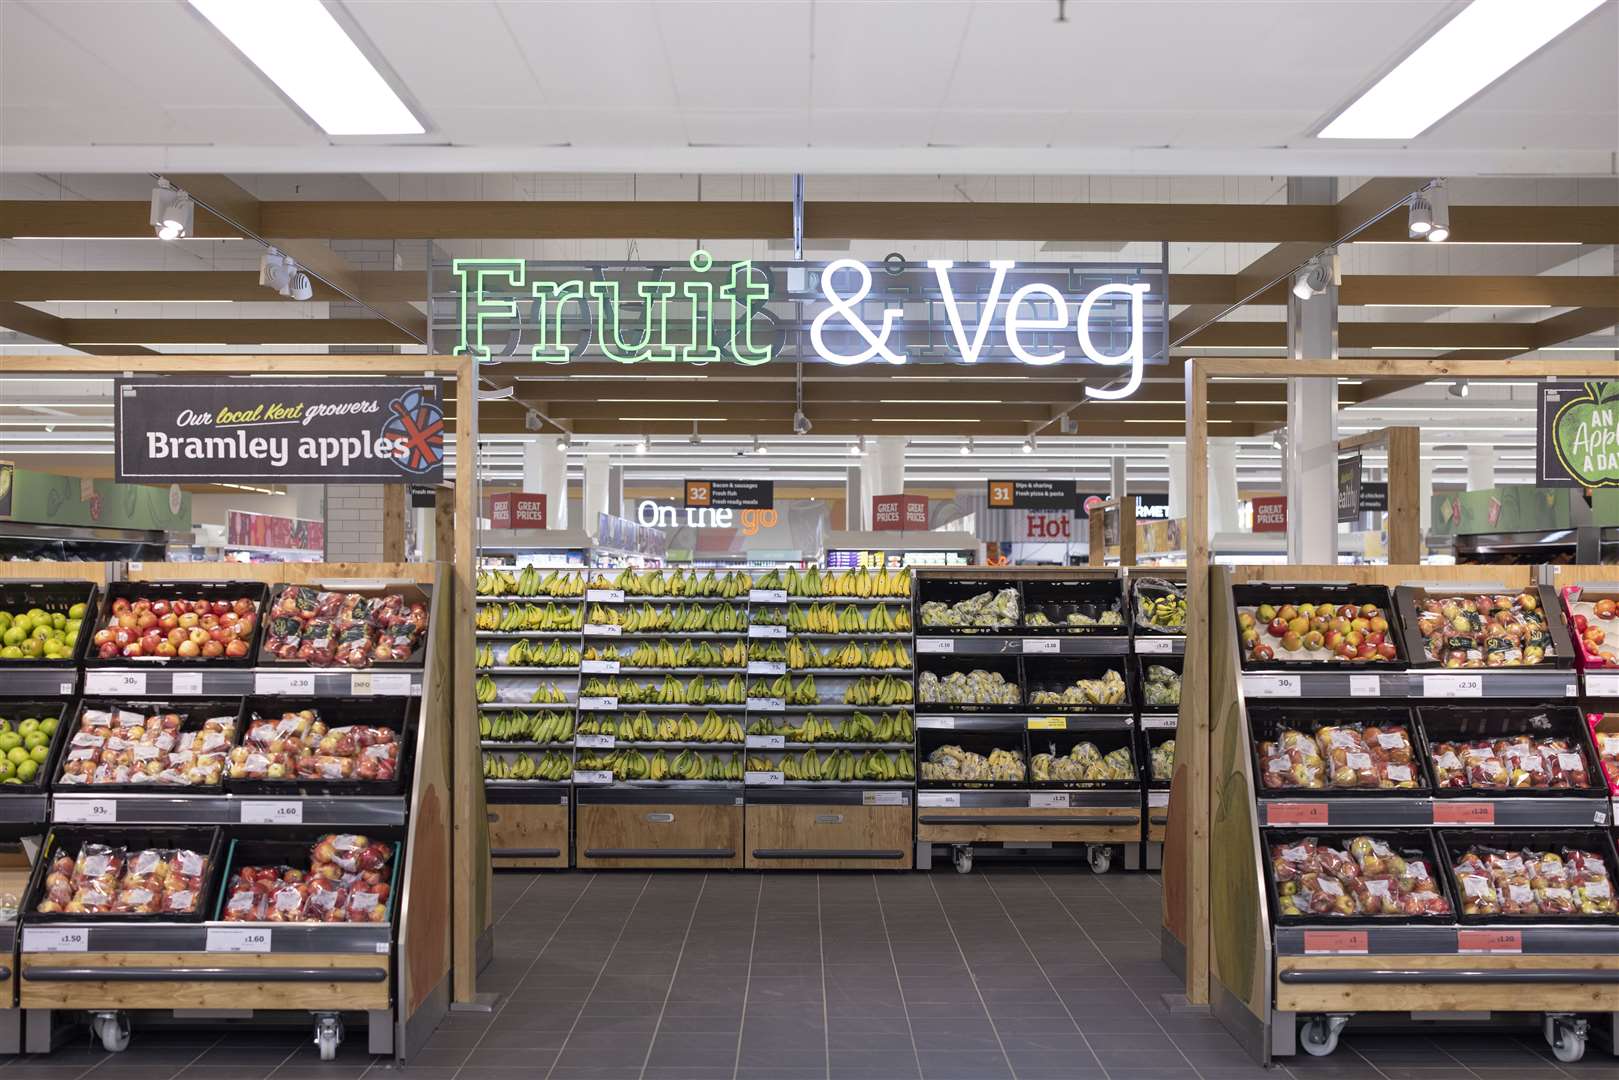 The Hempstead Valley store is home to Sainsbury's first Fresh Food Market. Picture: Jason Alden